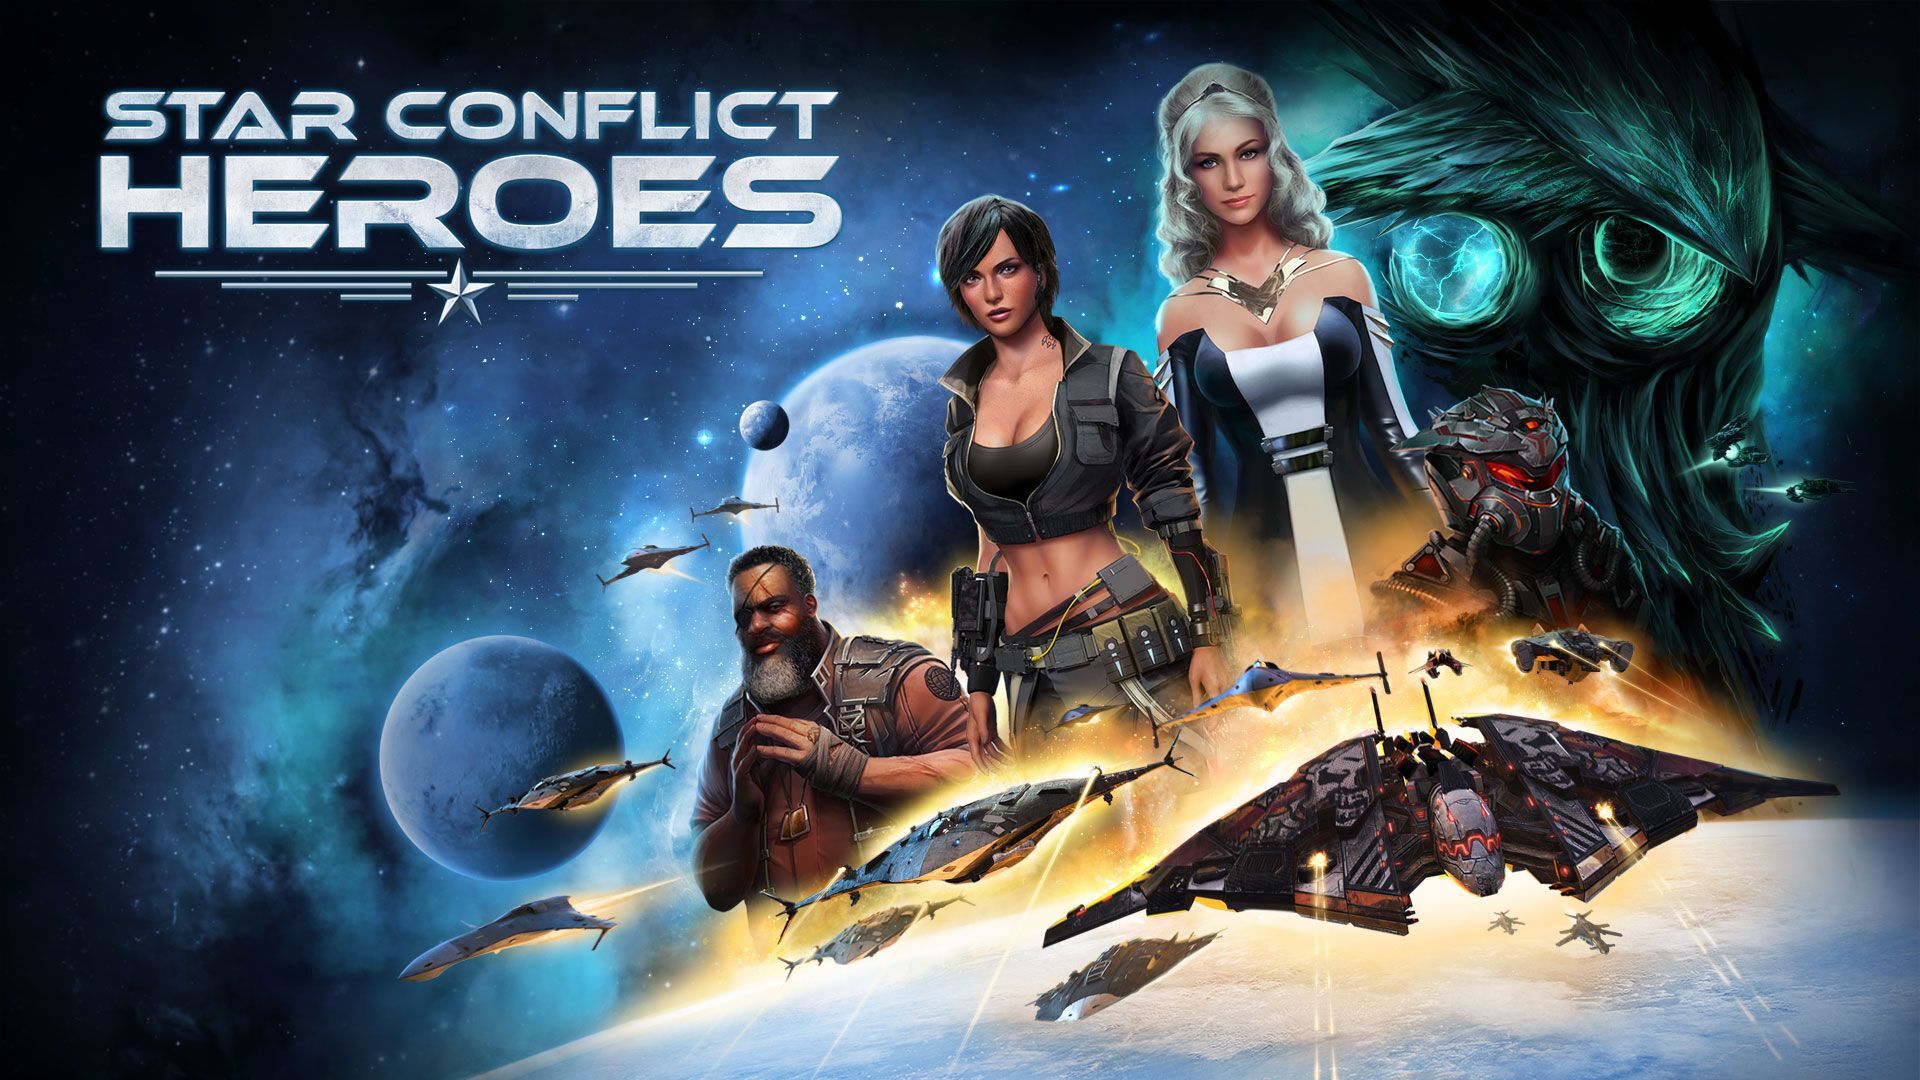 Star conflict heroes Star Conflict Heroes débarque sur Android